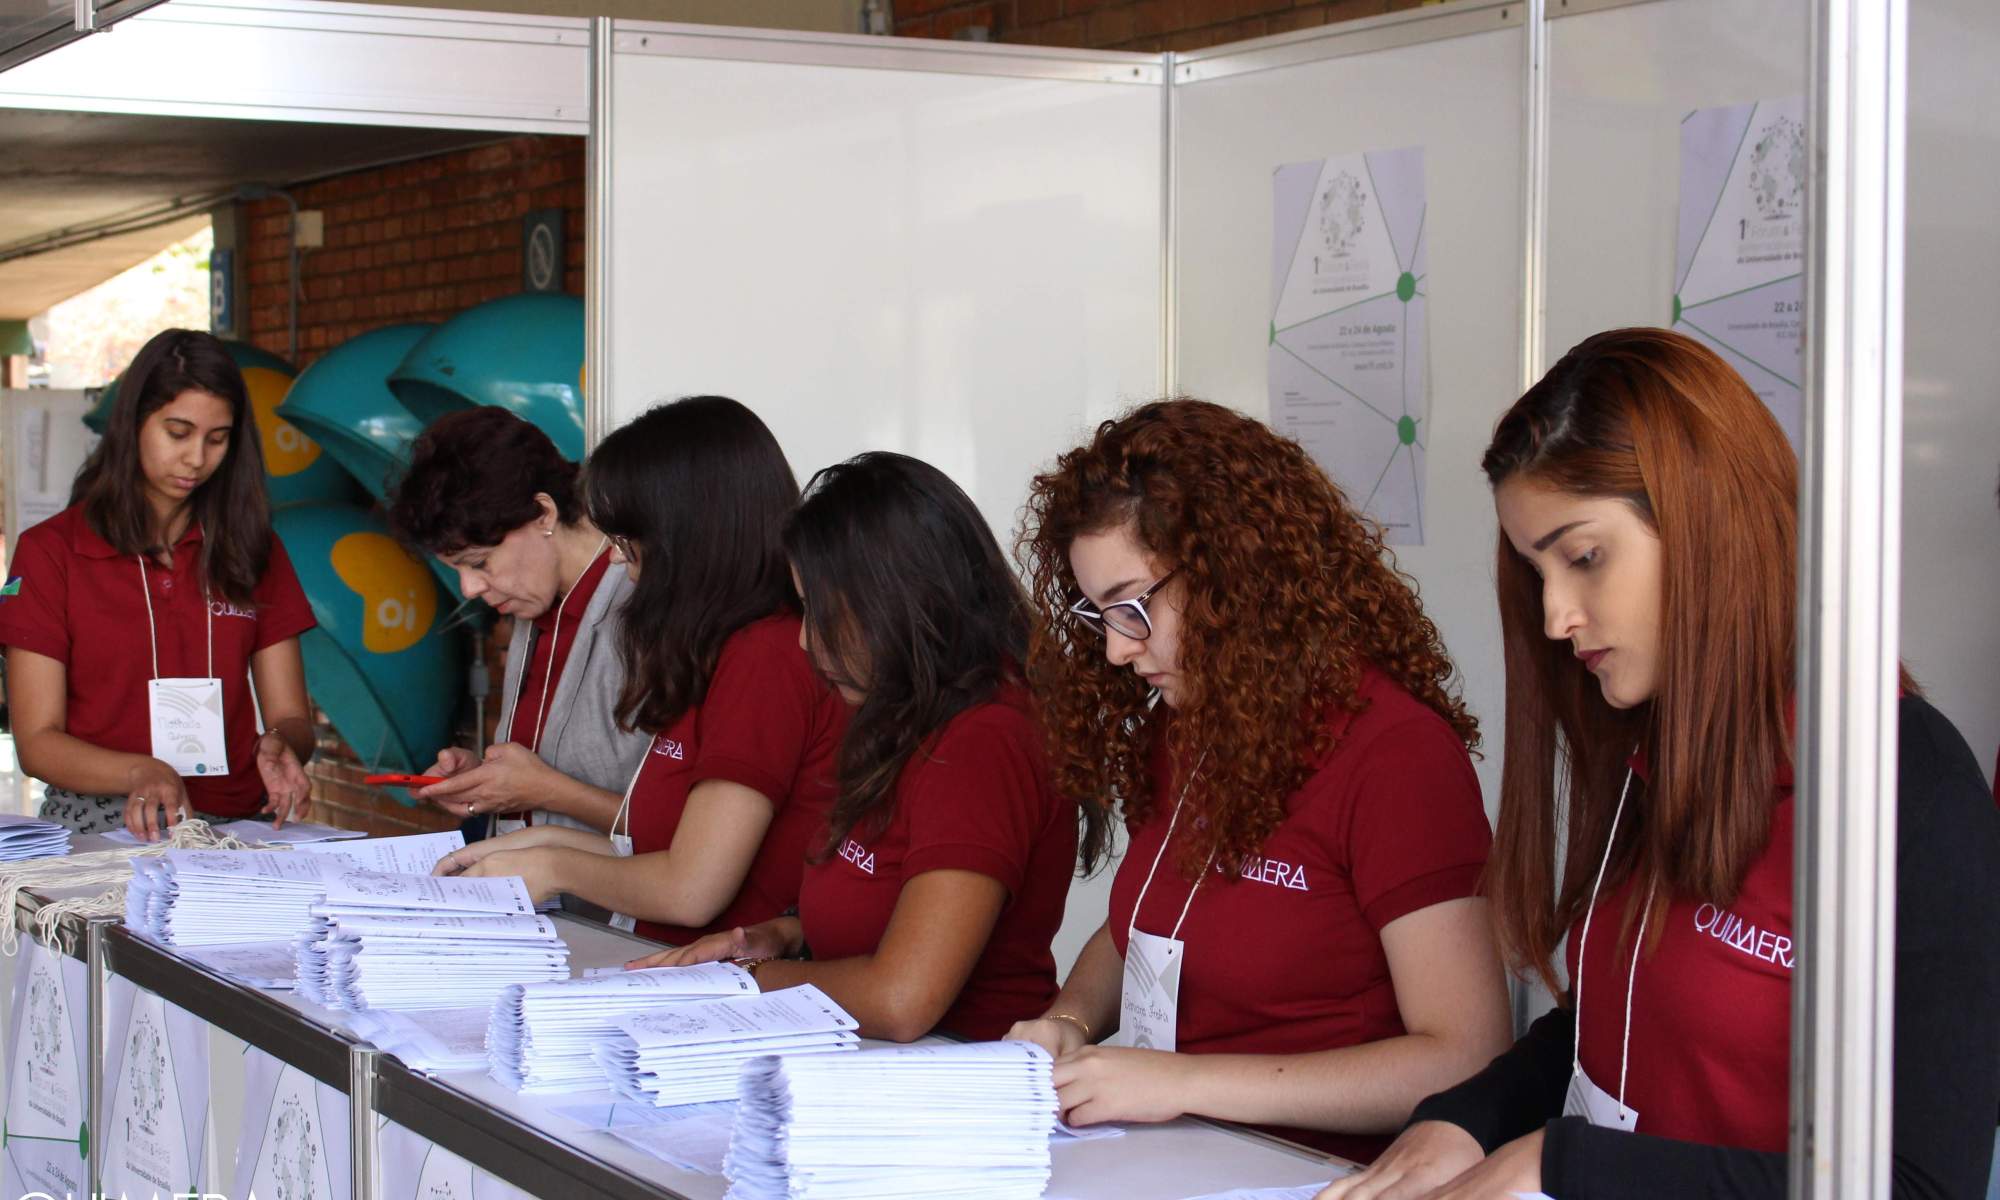 Image of Quimera at the Internationalization Fair event